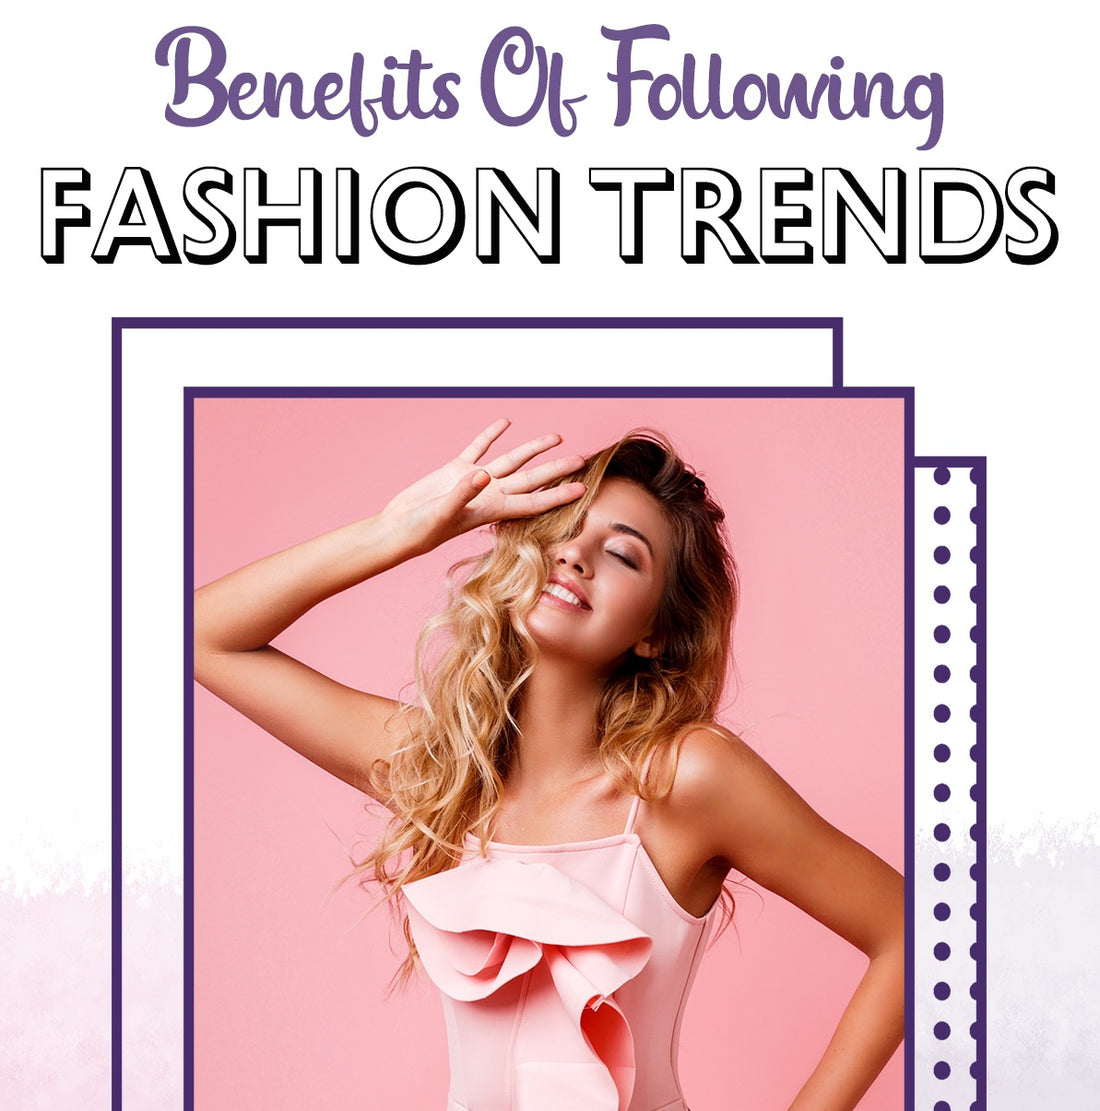 Benefits of Following Fashion Trends